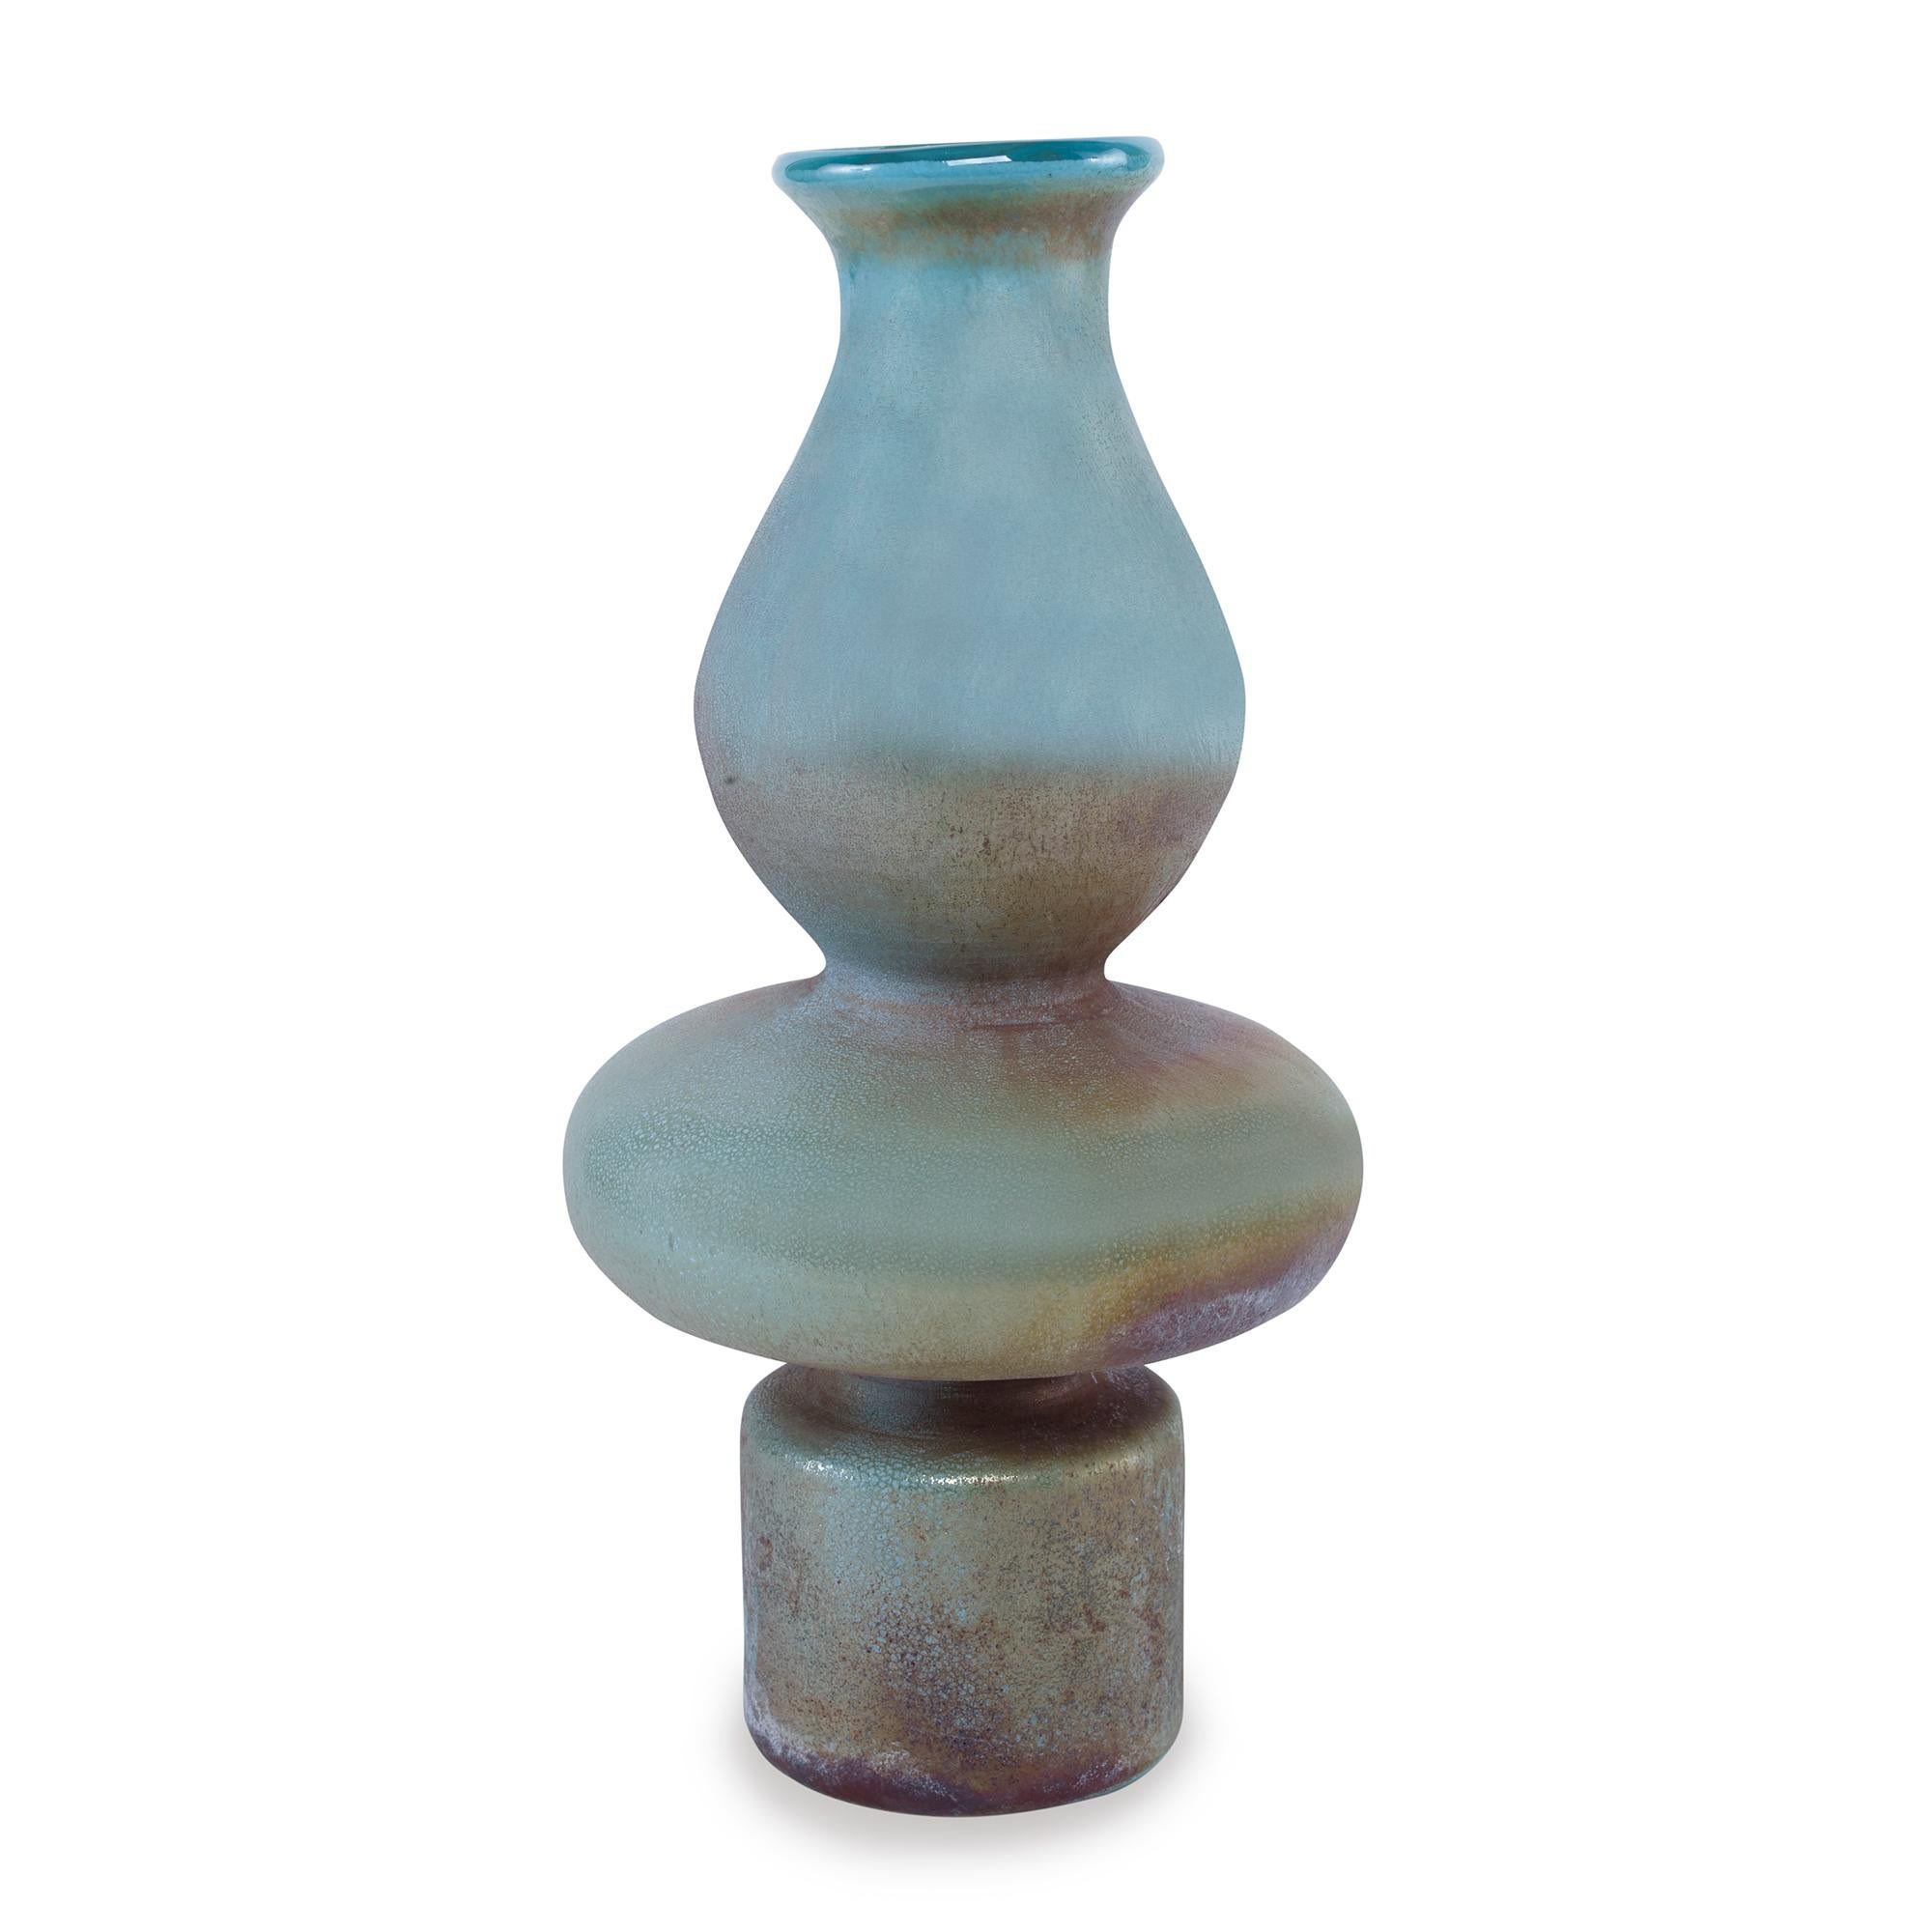 An iridescent glass vase with a 1970s inspired shape. Due to the handmade nature of this vase, variation in colors are to be expected.
 